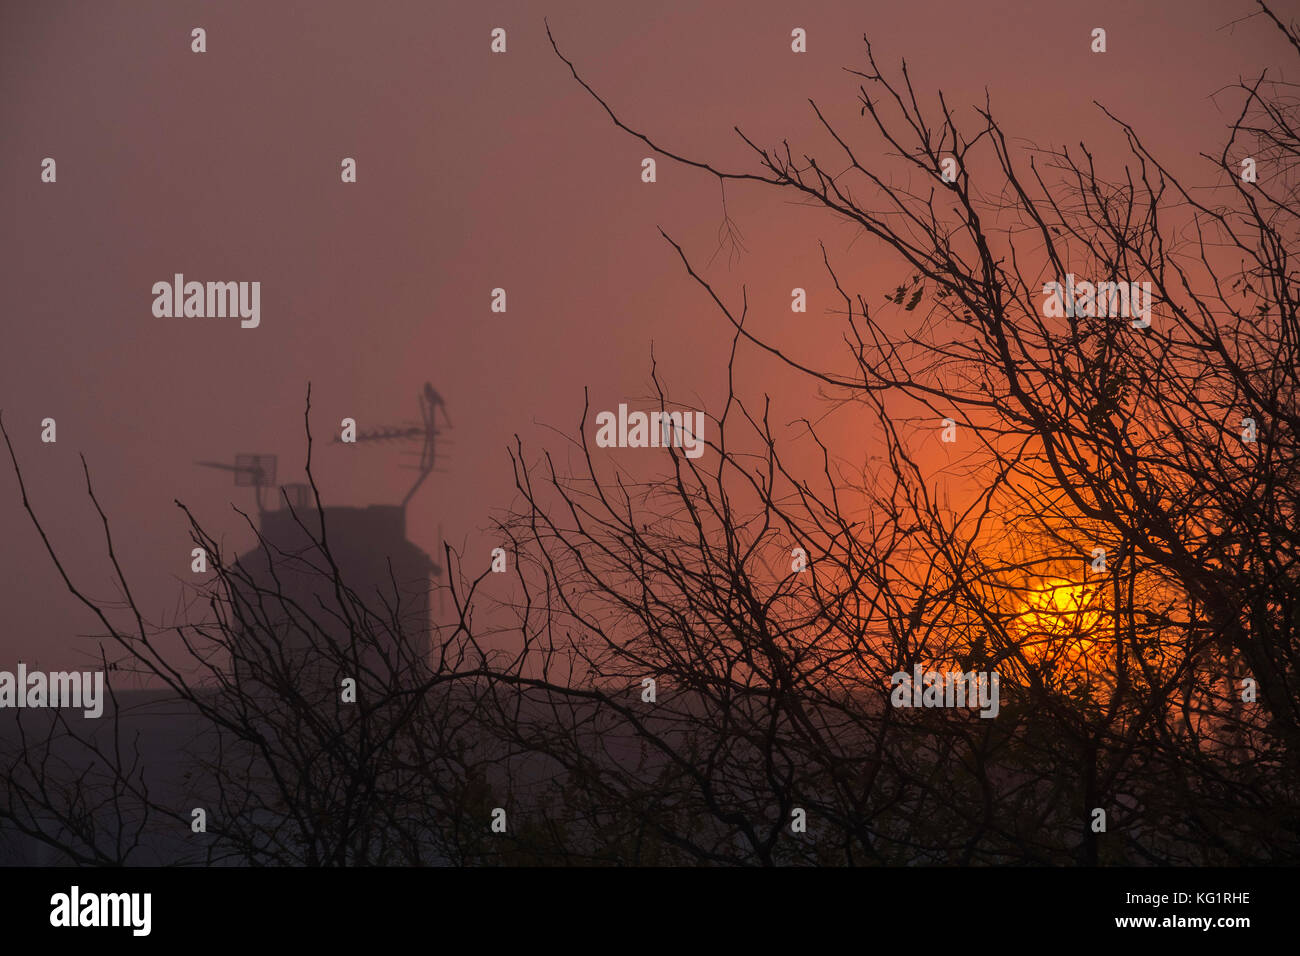 London Borough of Merton, UK. 3 November, 2017. A thick bank of fog approaches Morden as rush hour begins, creating a dramatic orange sunrise. Credit: Malcolm Park/Alamy live News. Stock Photo